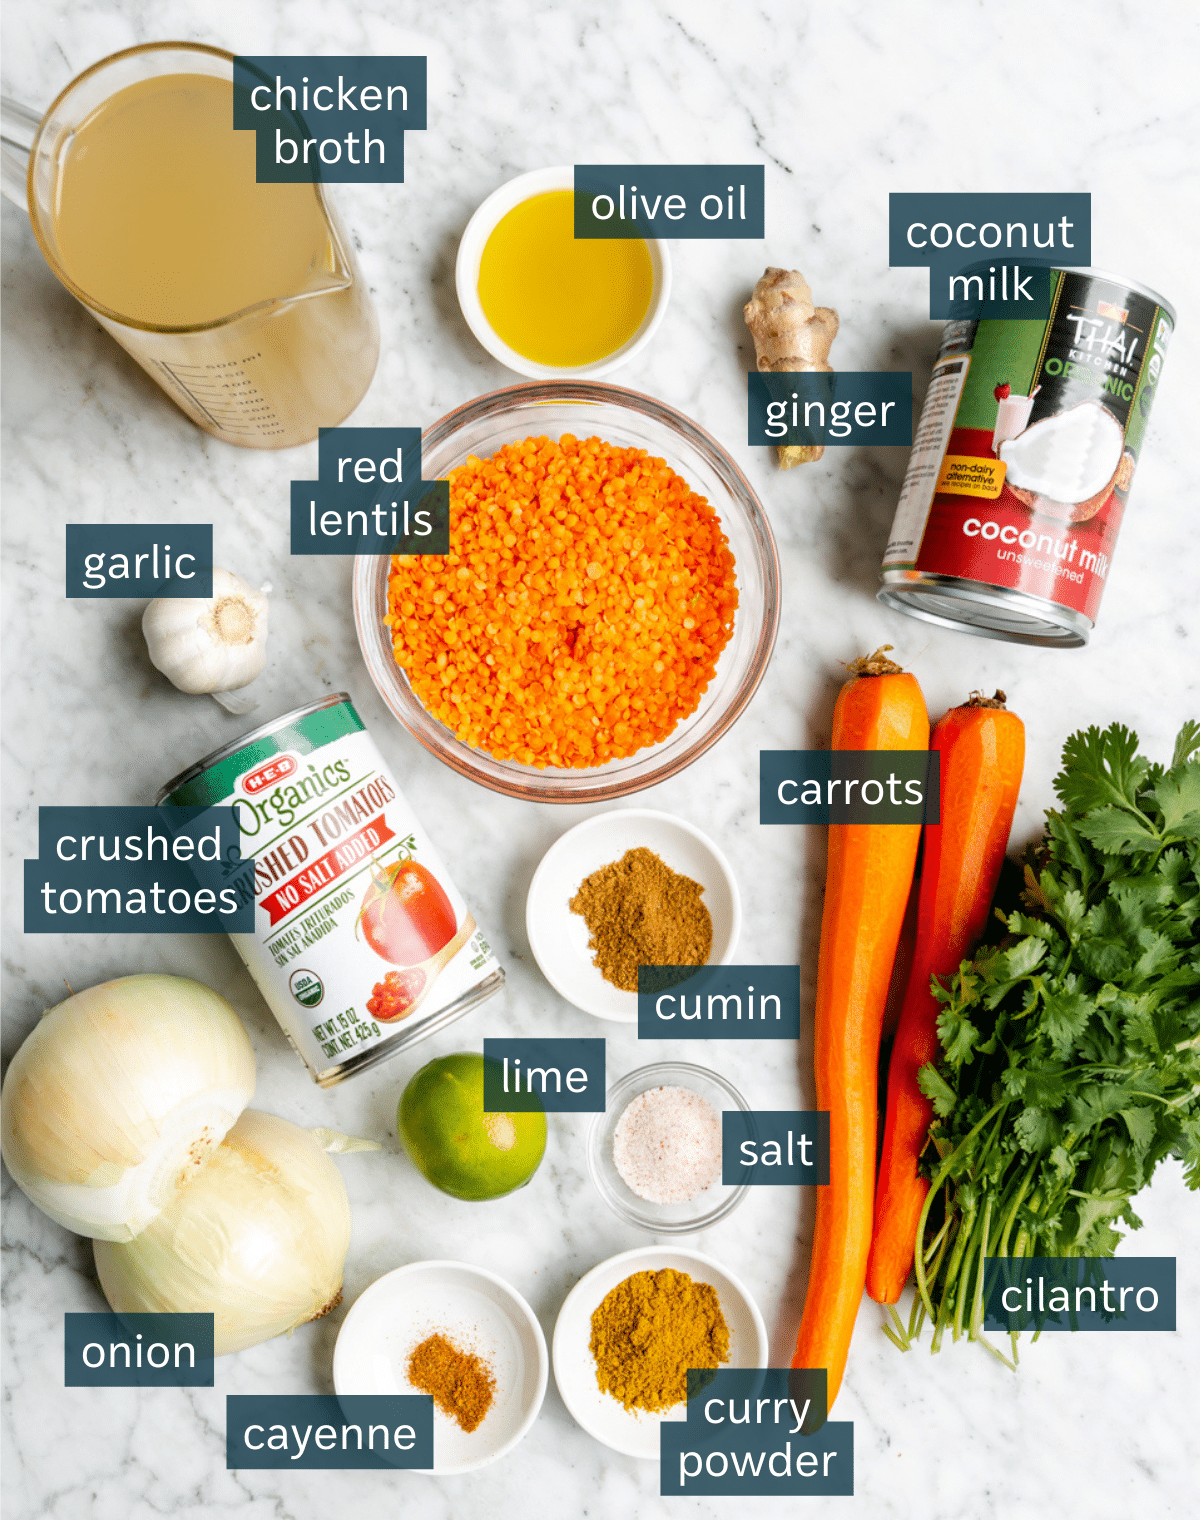 Top down view of lentil soup ingredients on a gray and white marble surface.